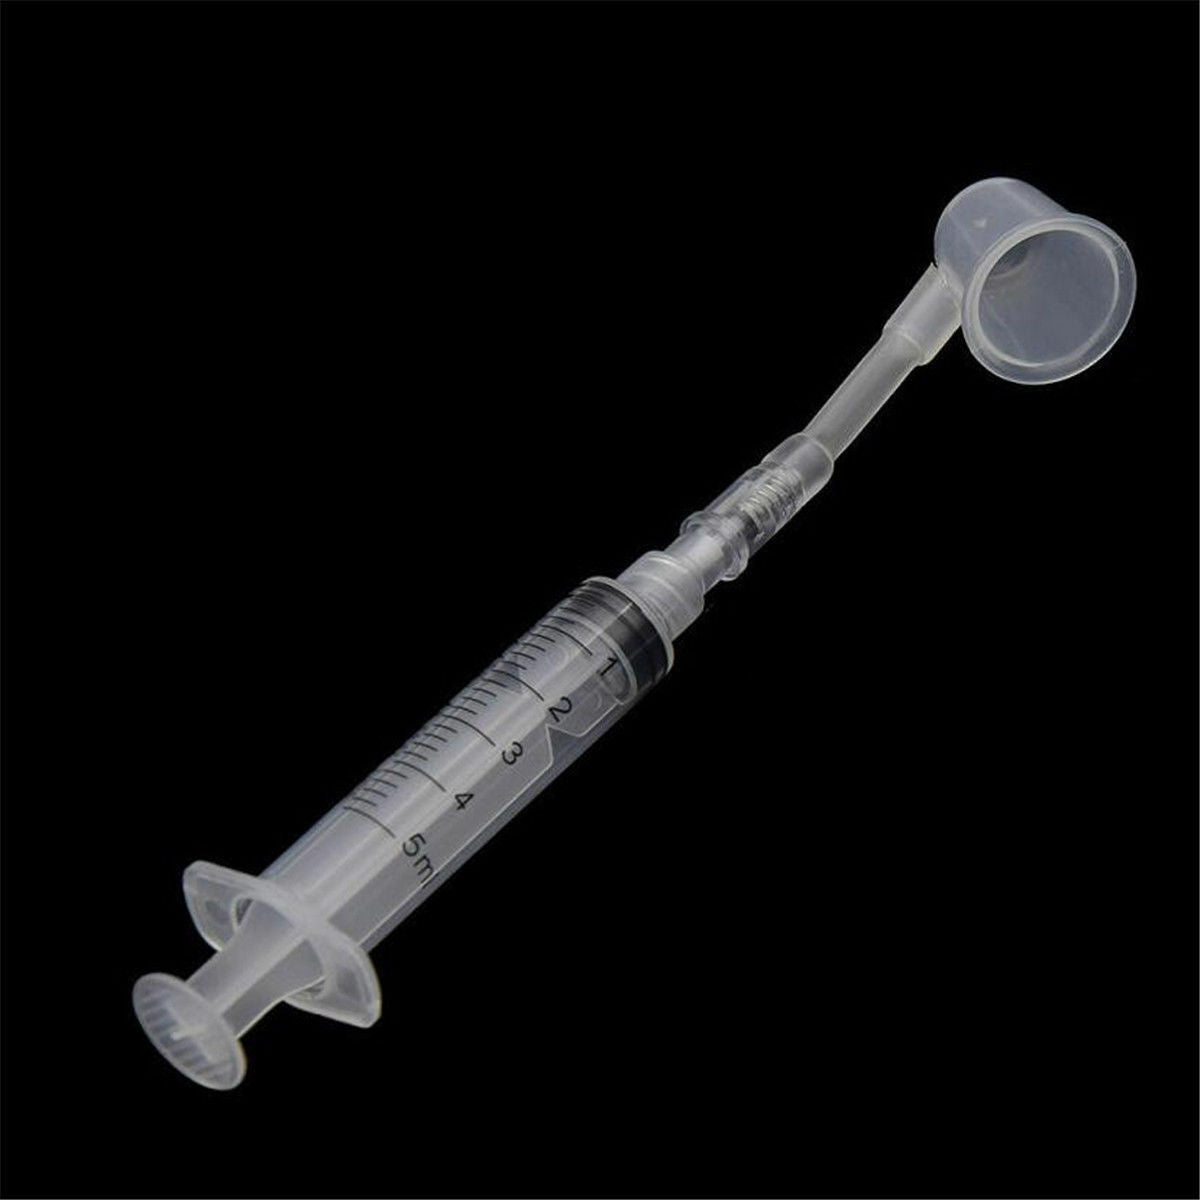 1 Set Nipple Corrector Device Correction For Inverted Nipples Treatment Enlarger